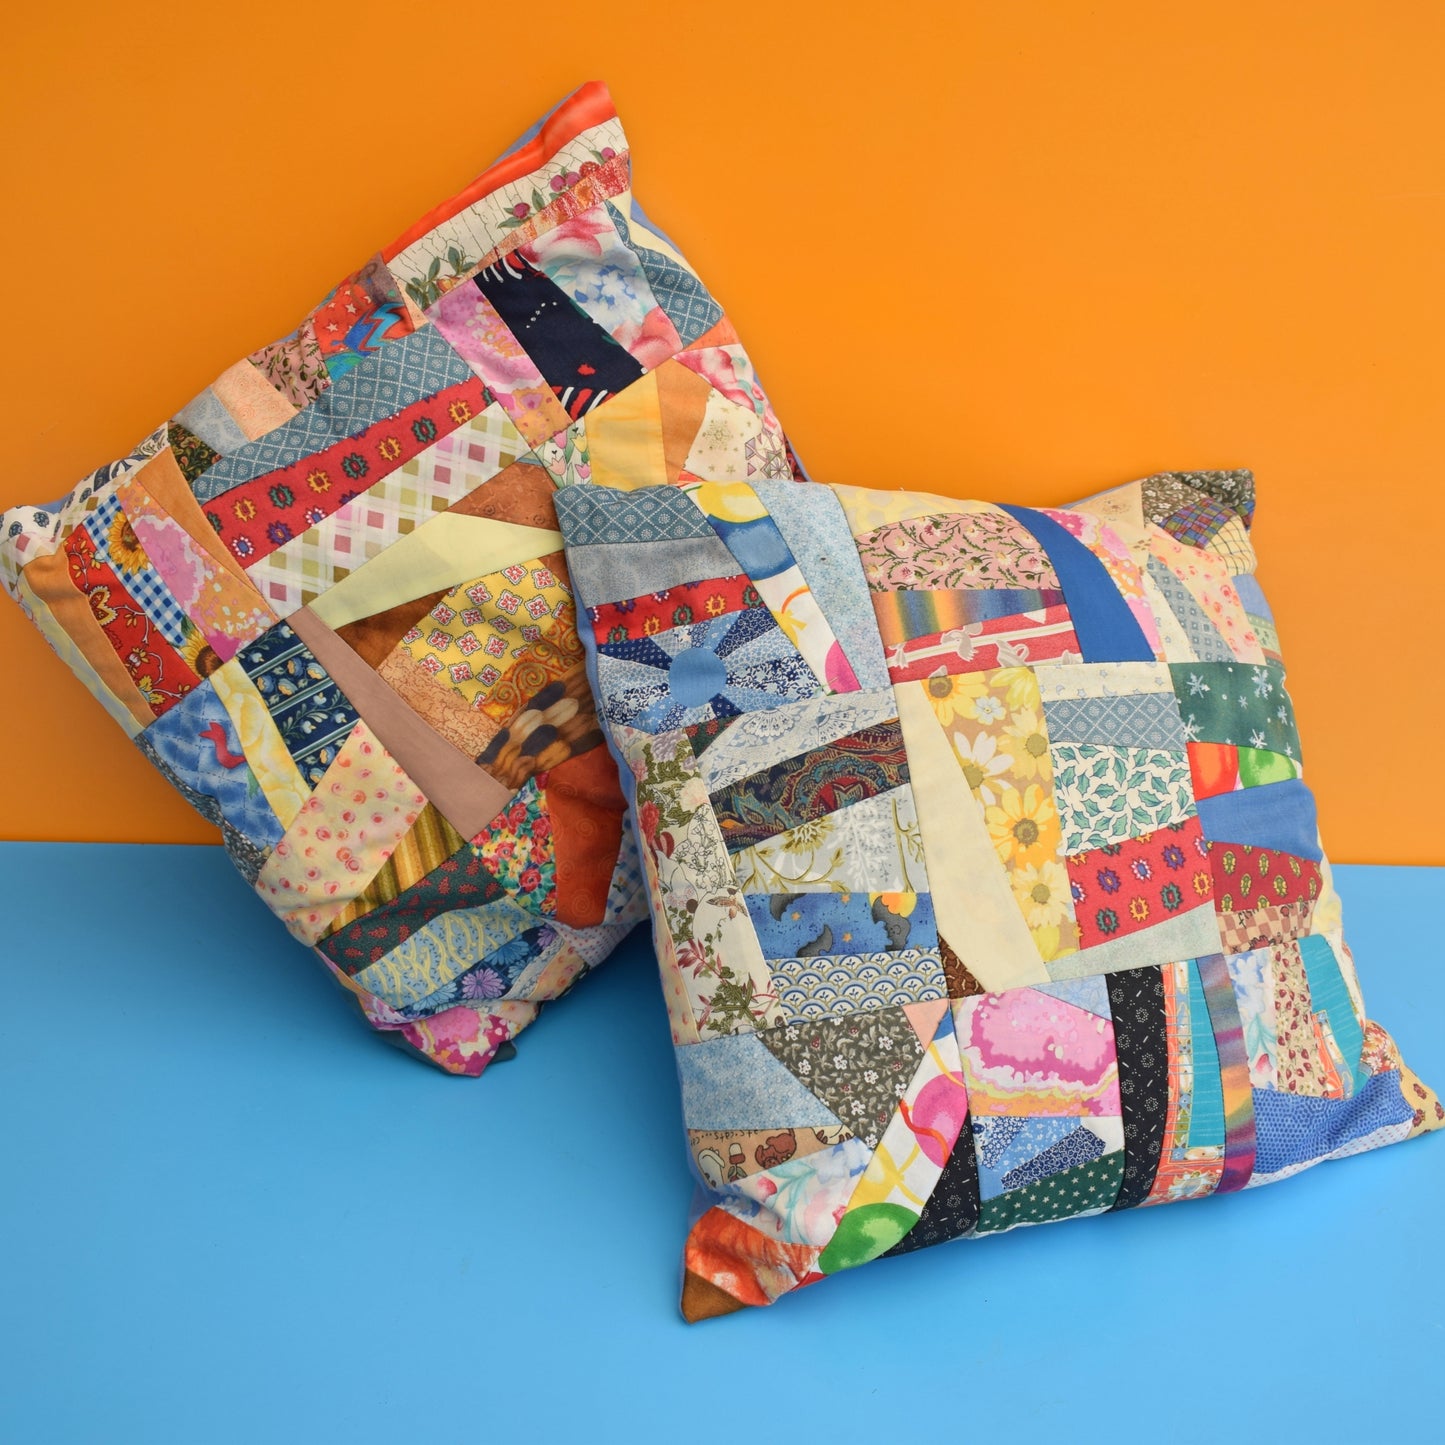 Vintage 1980s Fabric Patchwork Cushions